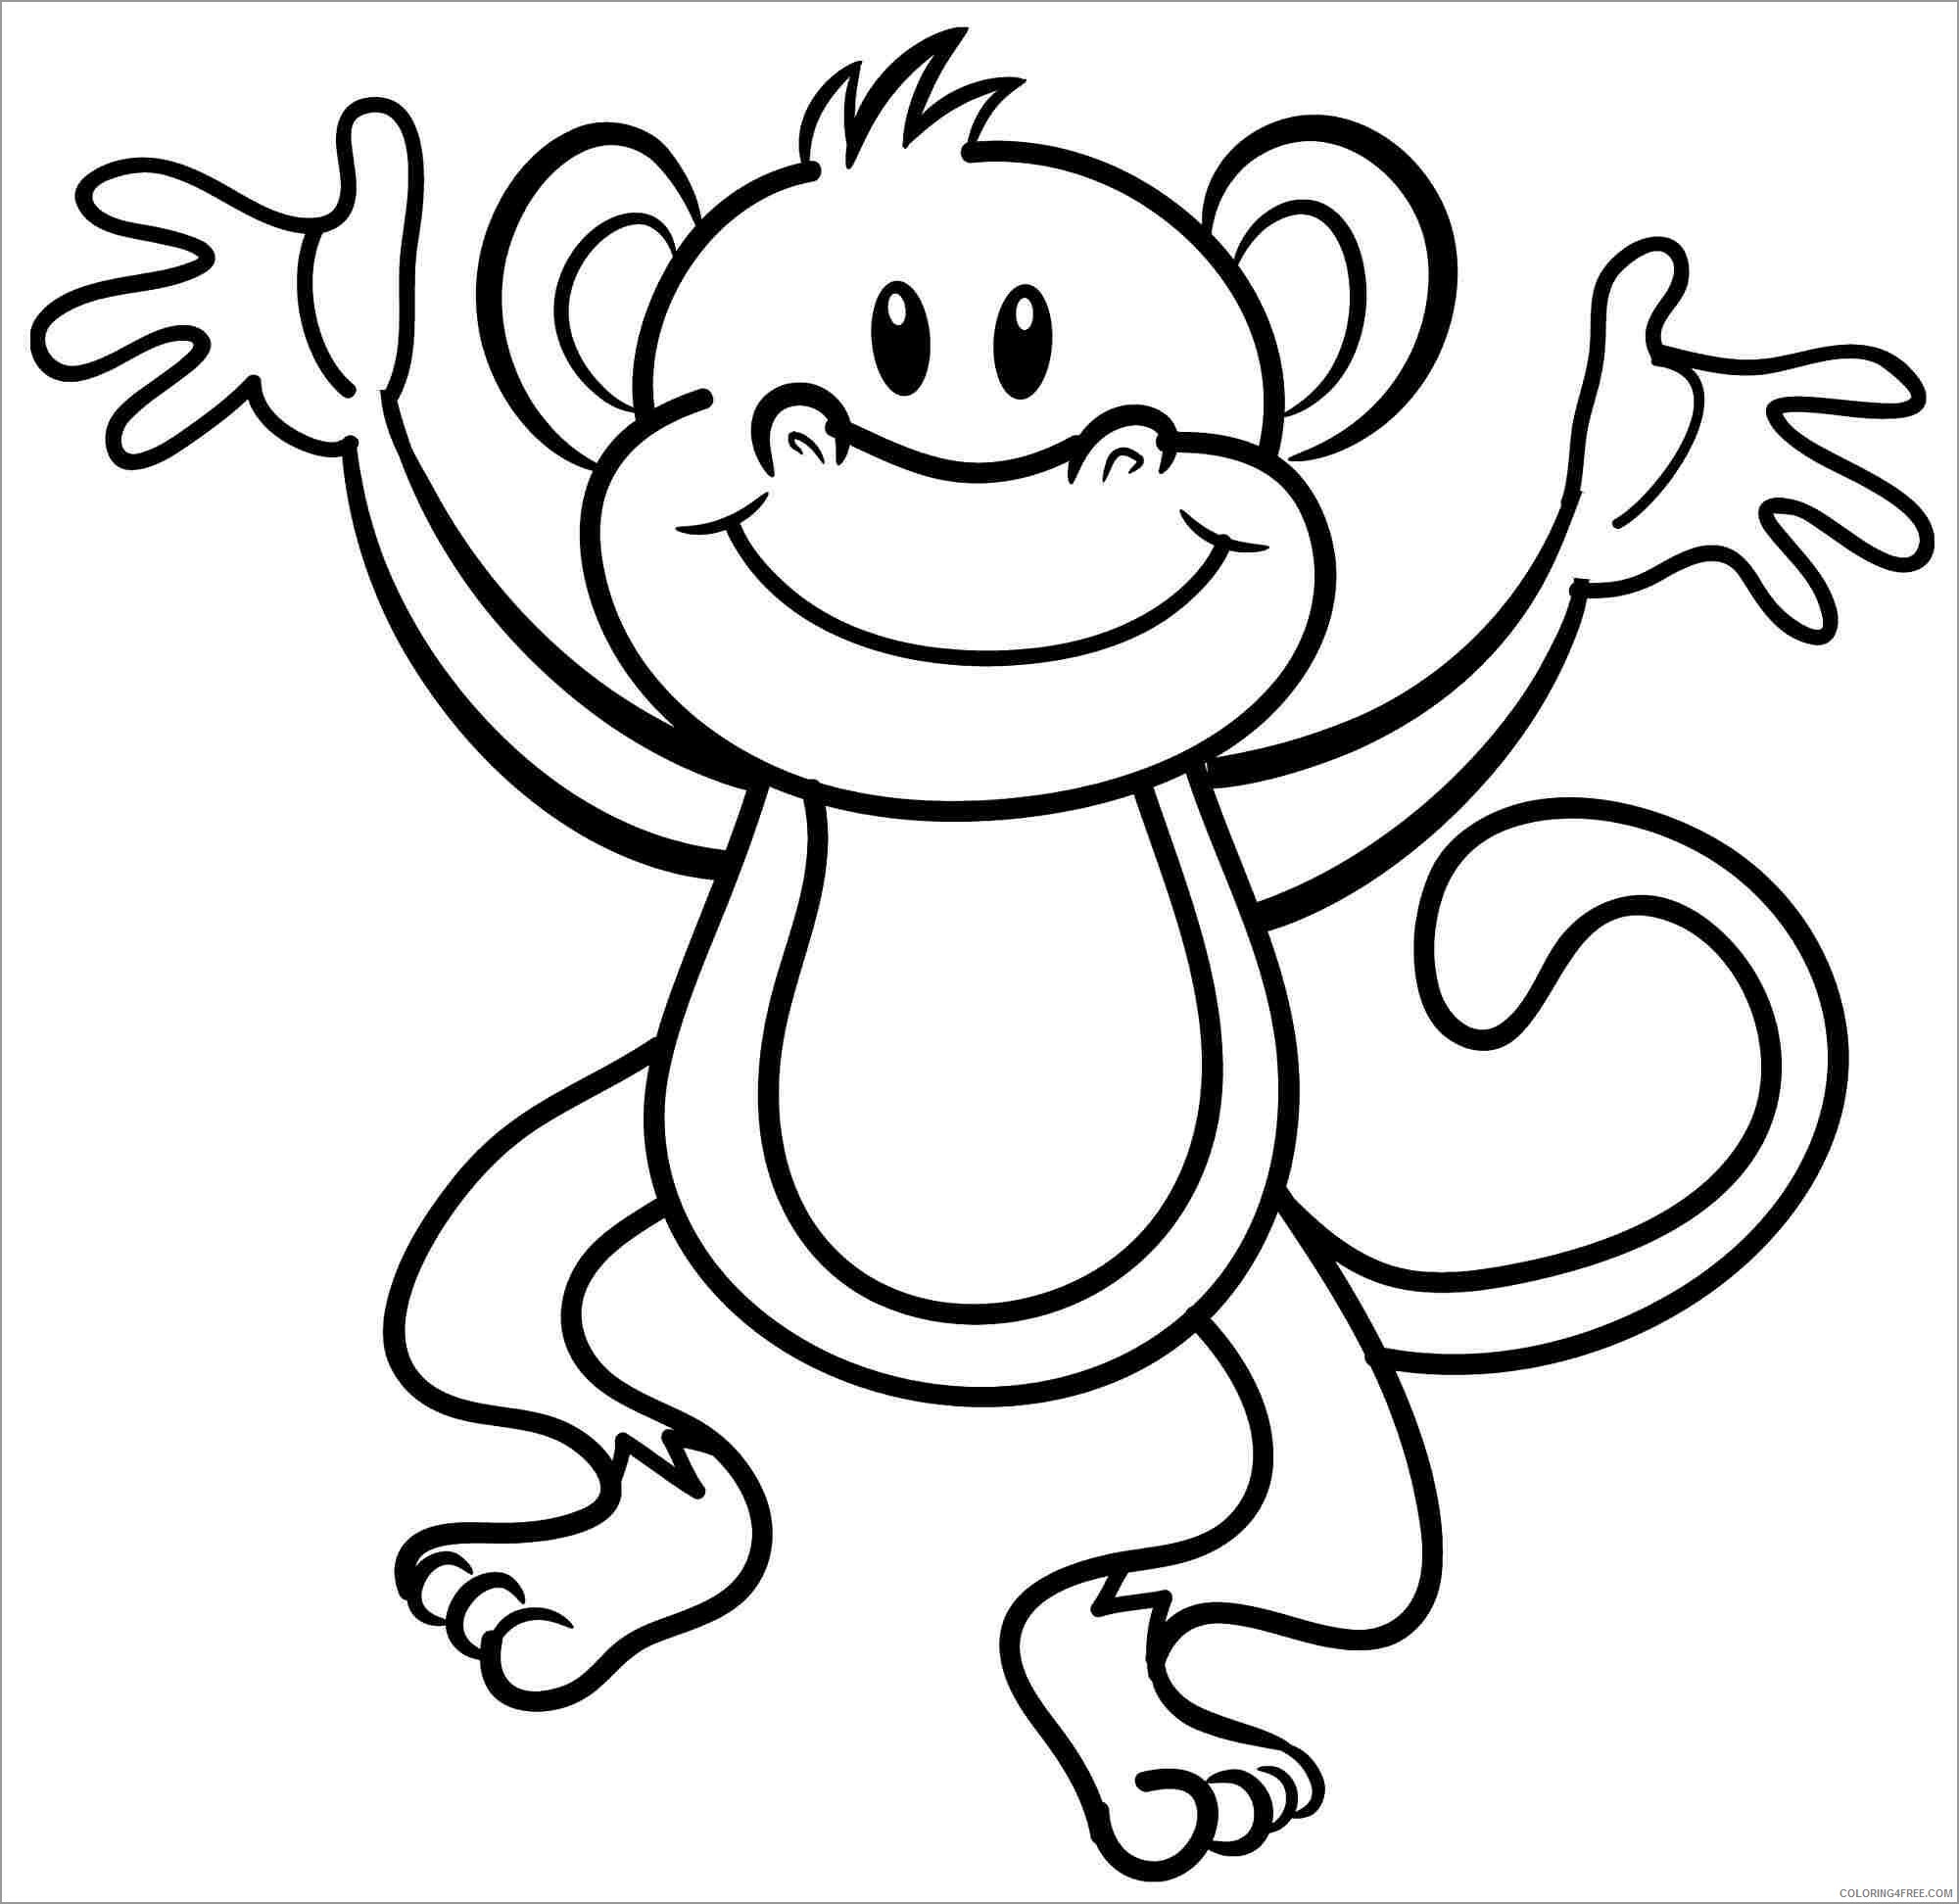 Monkey Coloring Pages Animal Printable Sheets cute monkey 2021 3301 Coloring4free